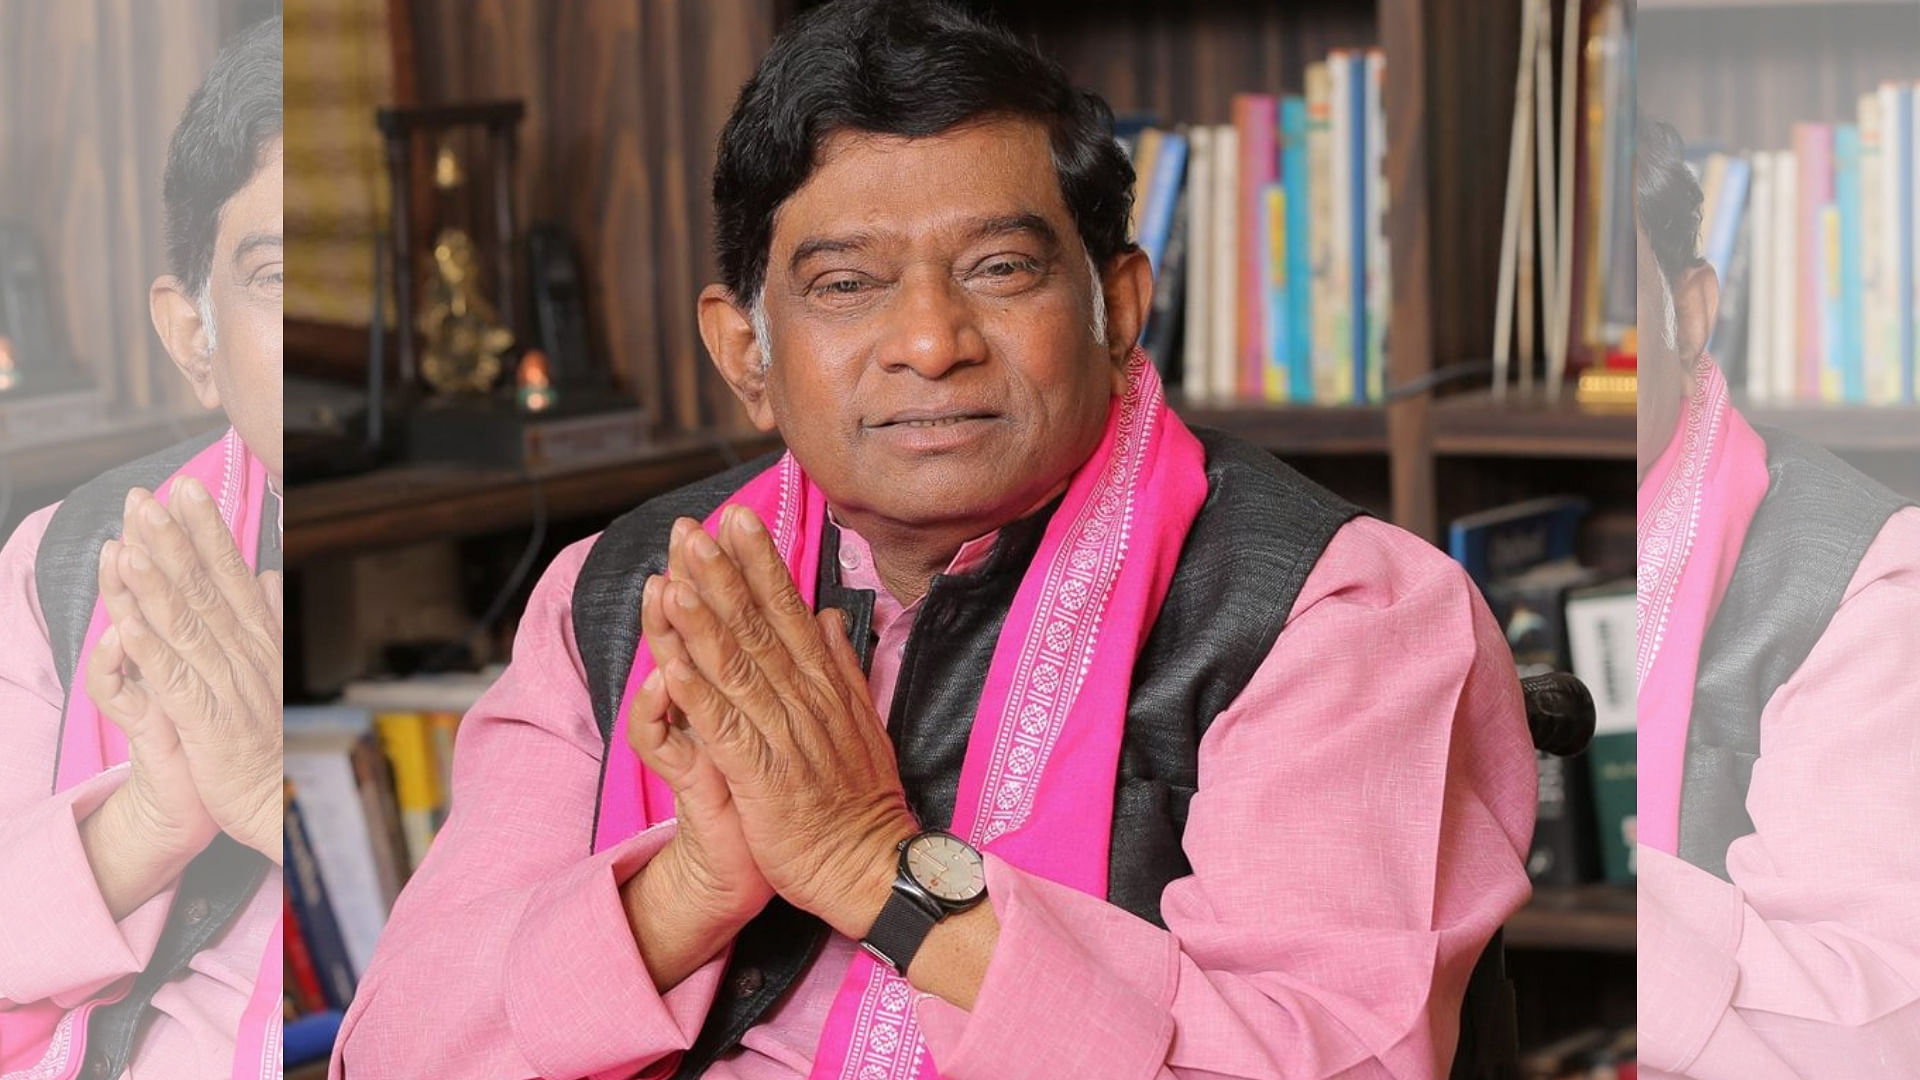 While the Congress accused the new combine of helping out the BJP by splitting its vote, Ajit Jogi said his alliance will harm both the national parties equally.